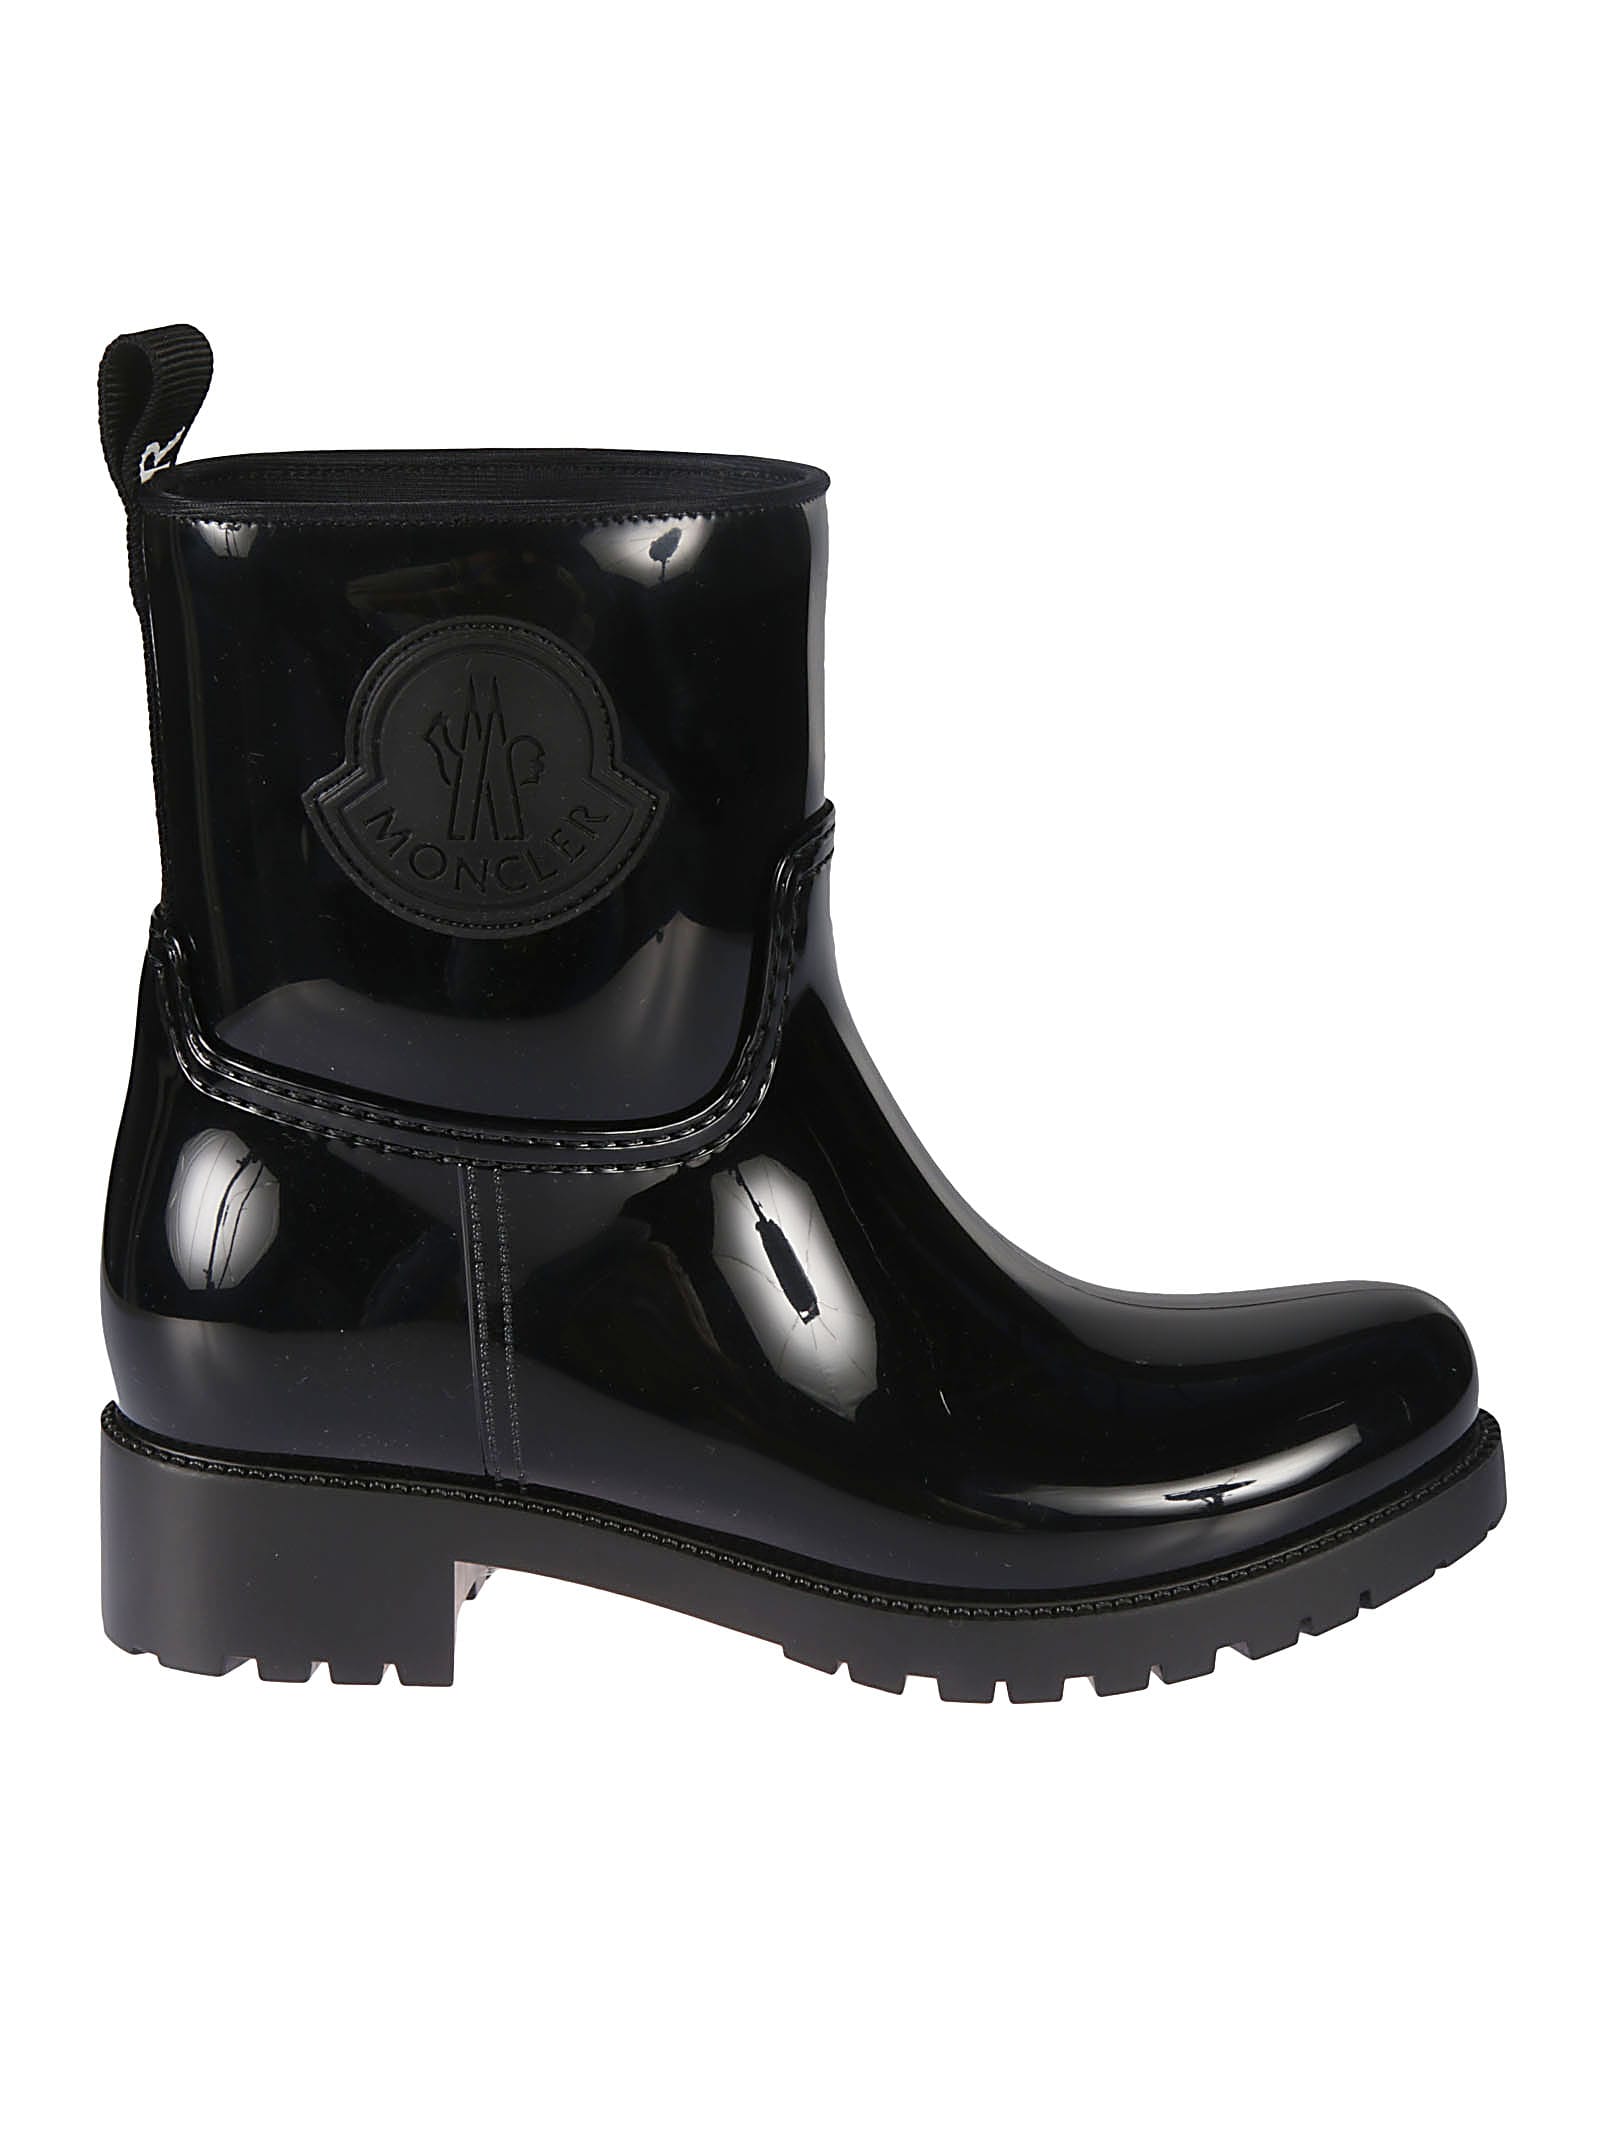 MONCLER SIDE LOGO PATCH BOOTS,4G700-00 04747GINETTE999